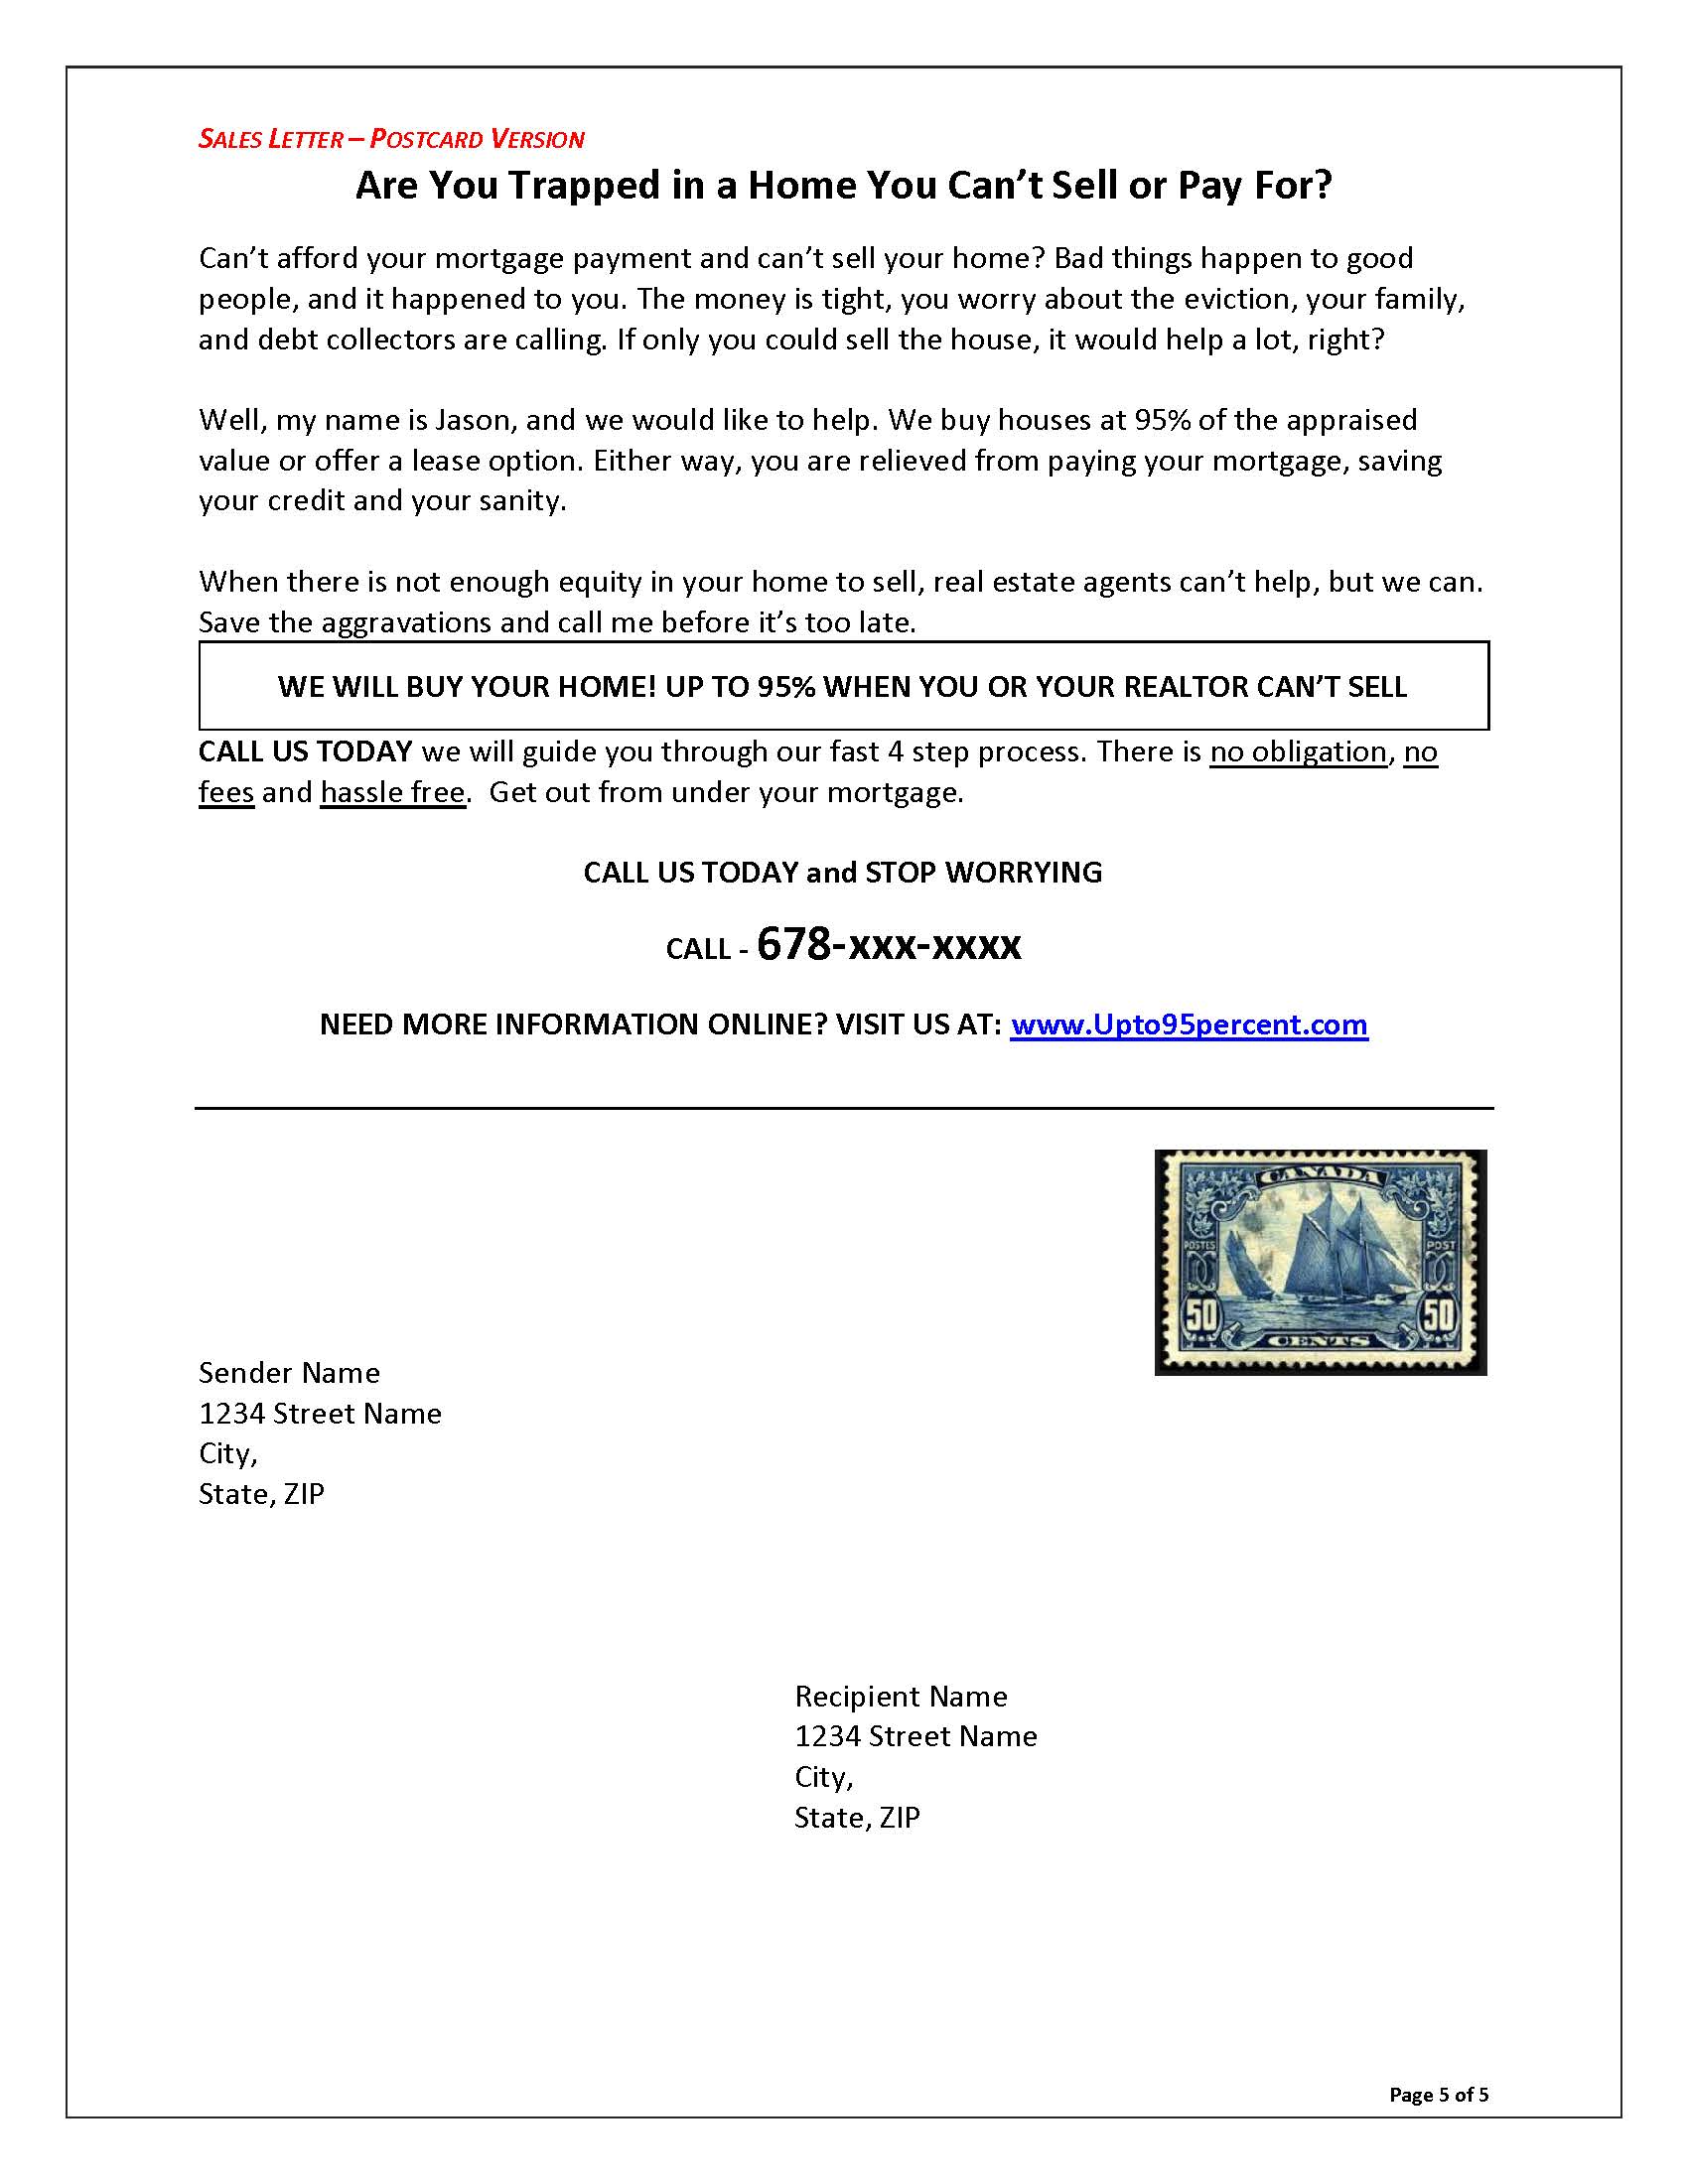 Sales Letter Series - Real Estate Co._Page_5